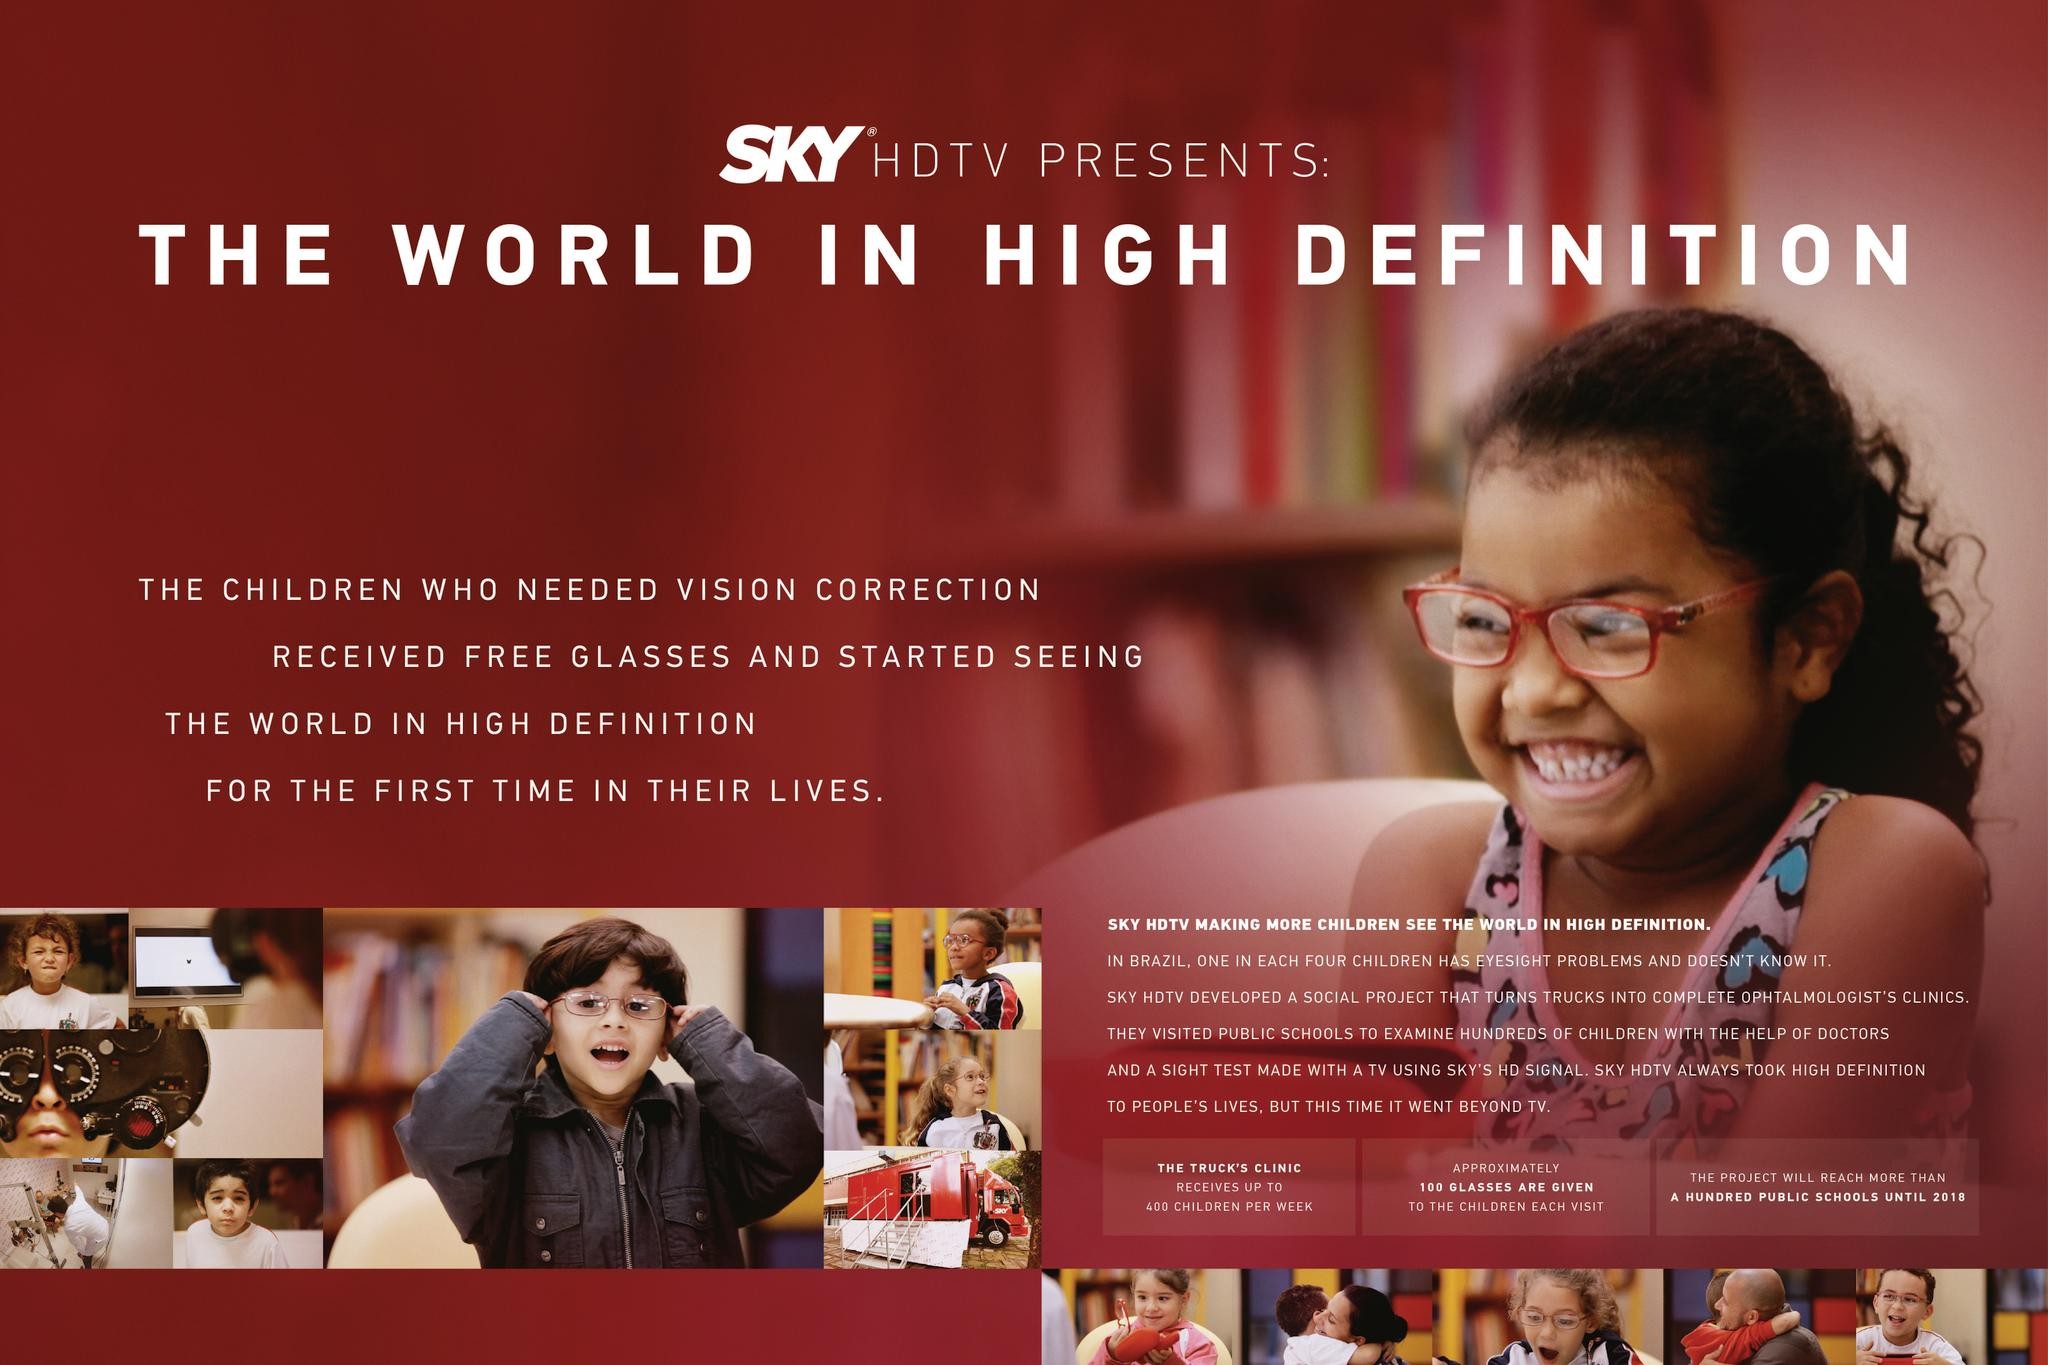 SKY HDTV - THE WORLD IN HIGH DEFINITION